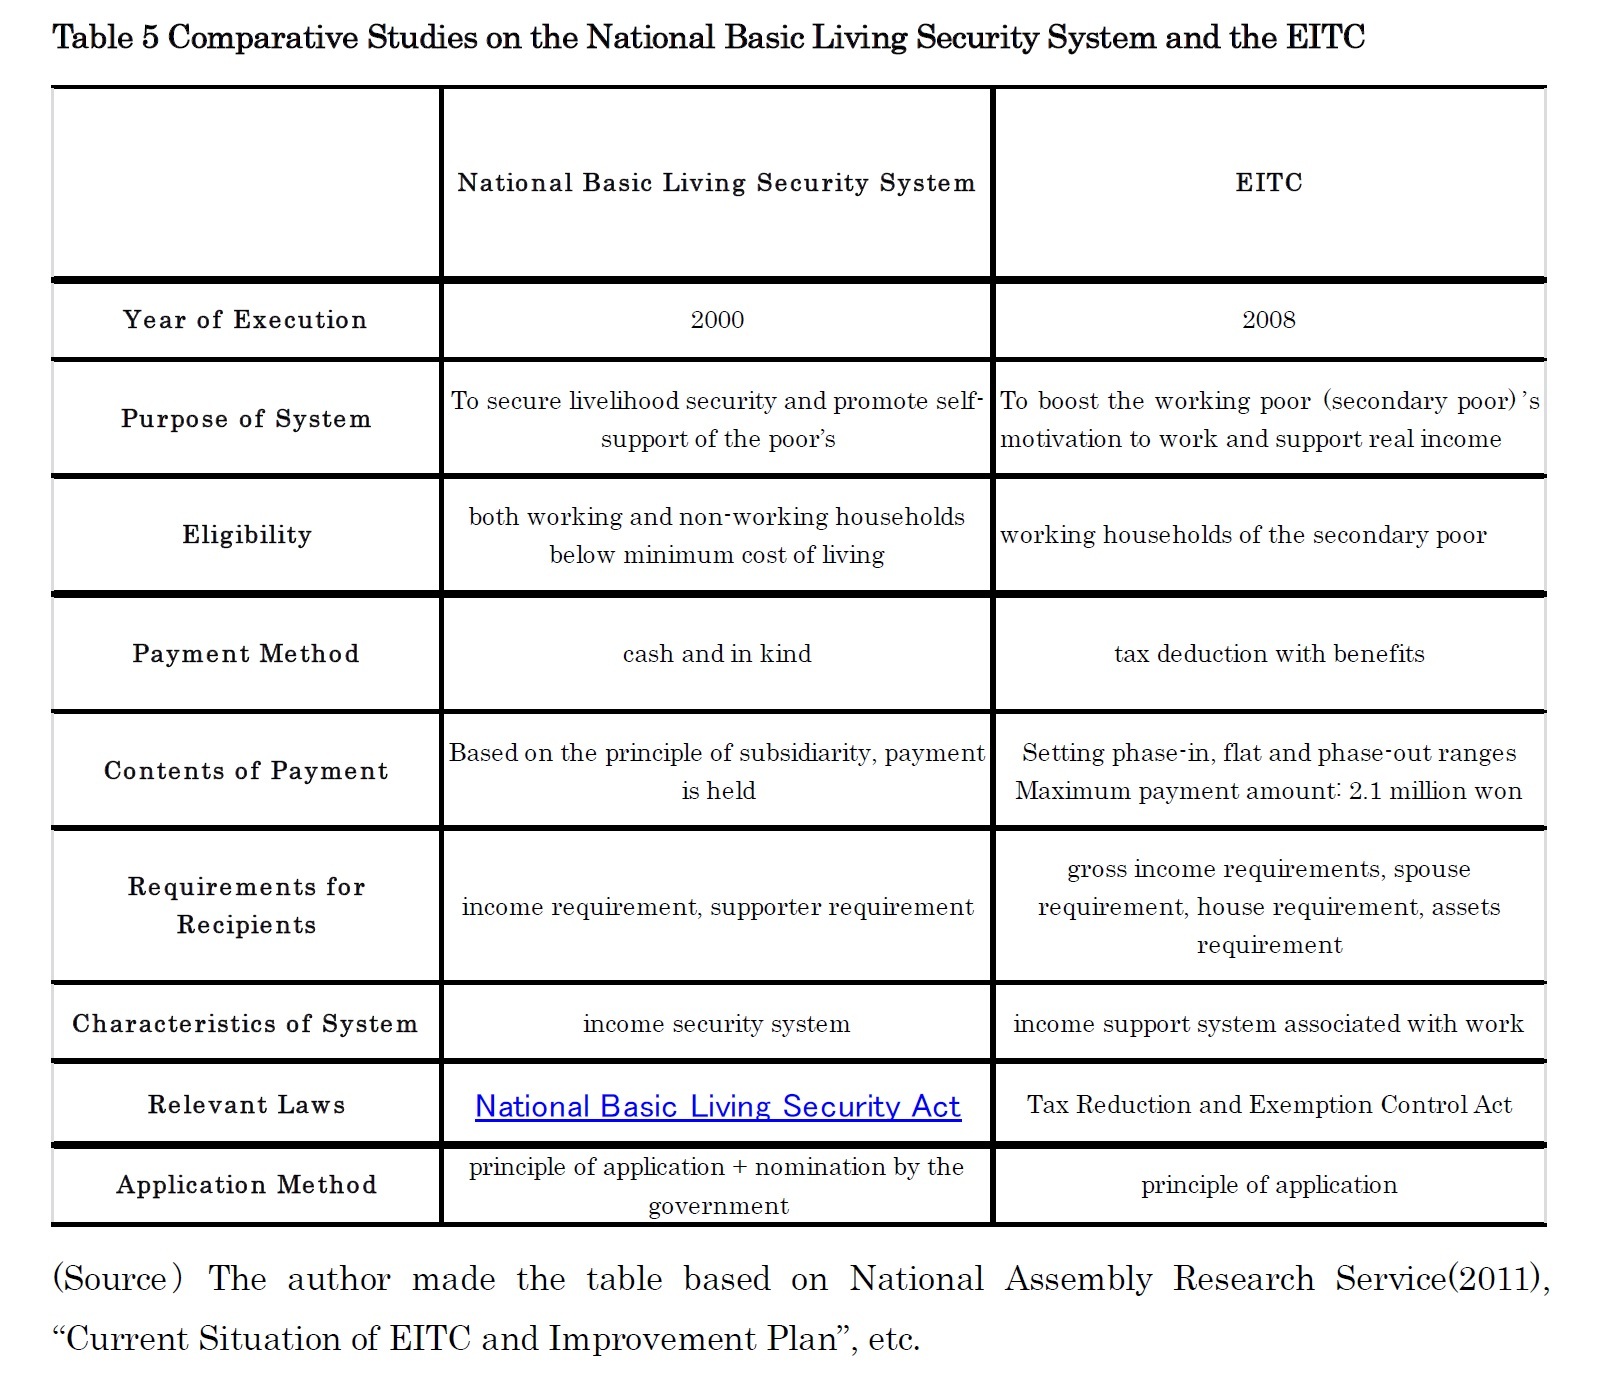 Table 5 Comparative Studies on the National Basic Living Security System and the EITC